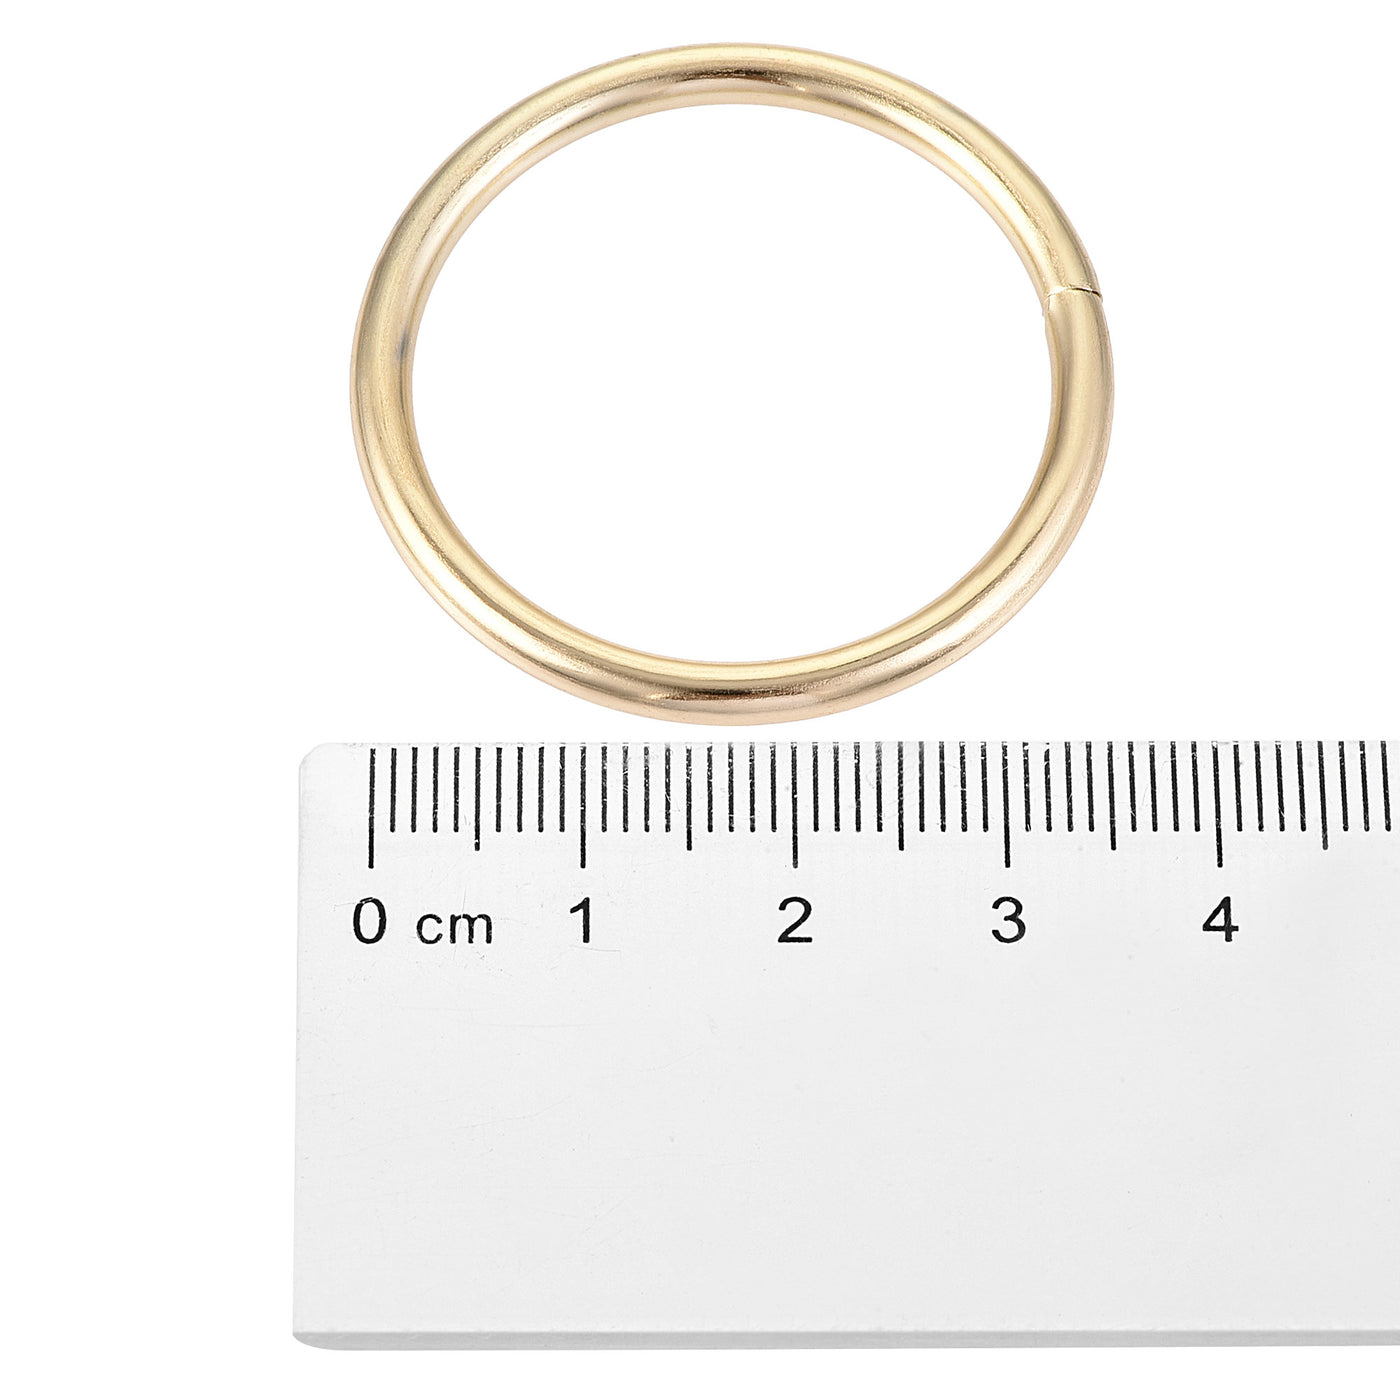 uxcell Uxcell 30mm Metal O Rings Non-Welded for Straps Bags Belts DIY Gold Tone 20pcs